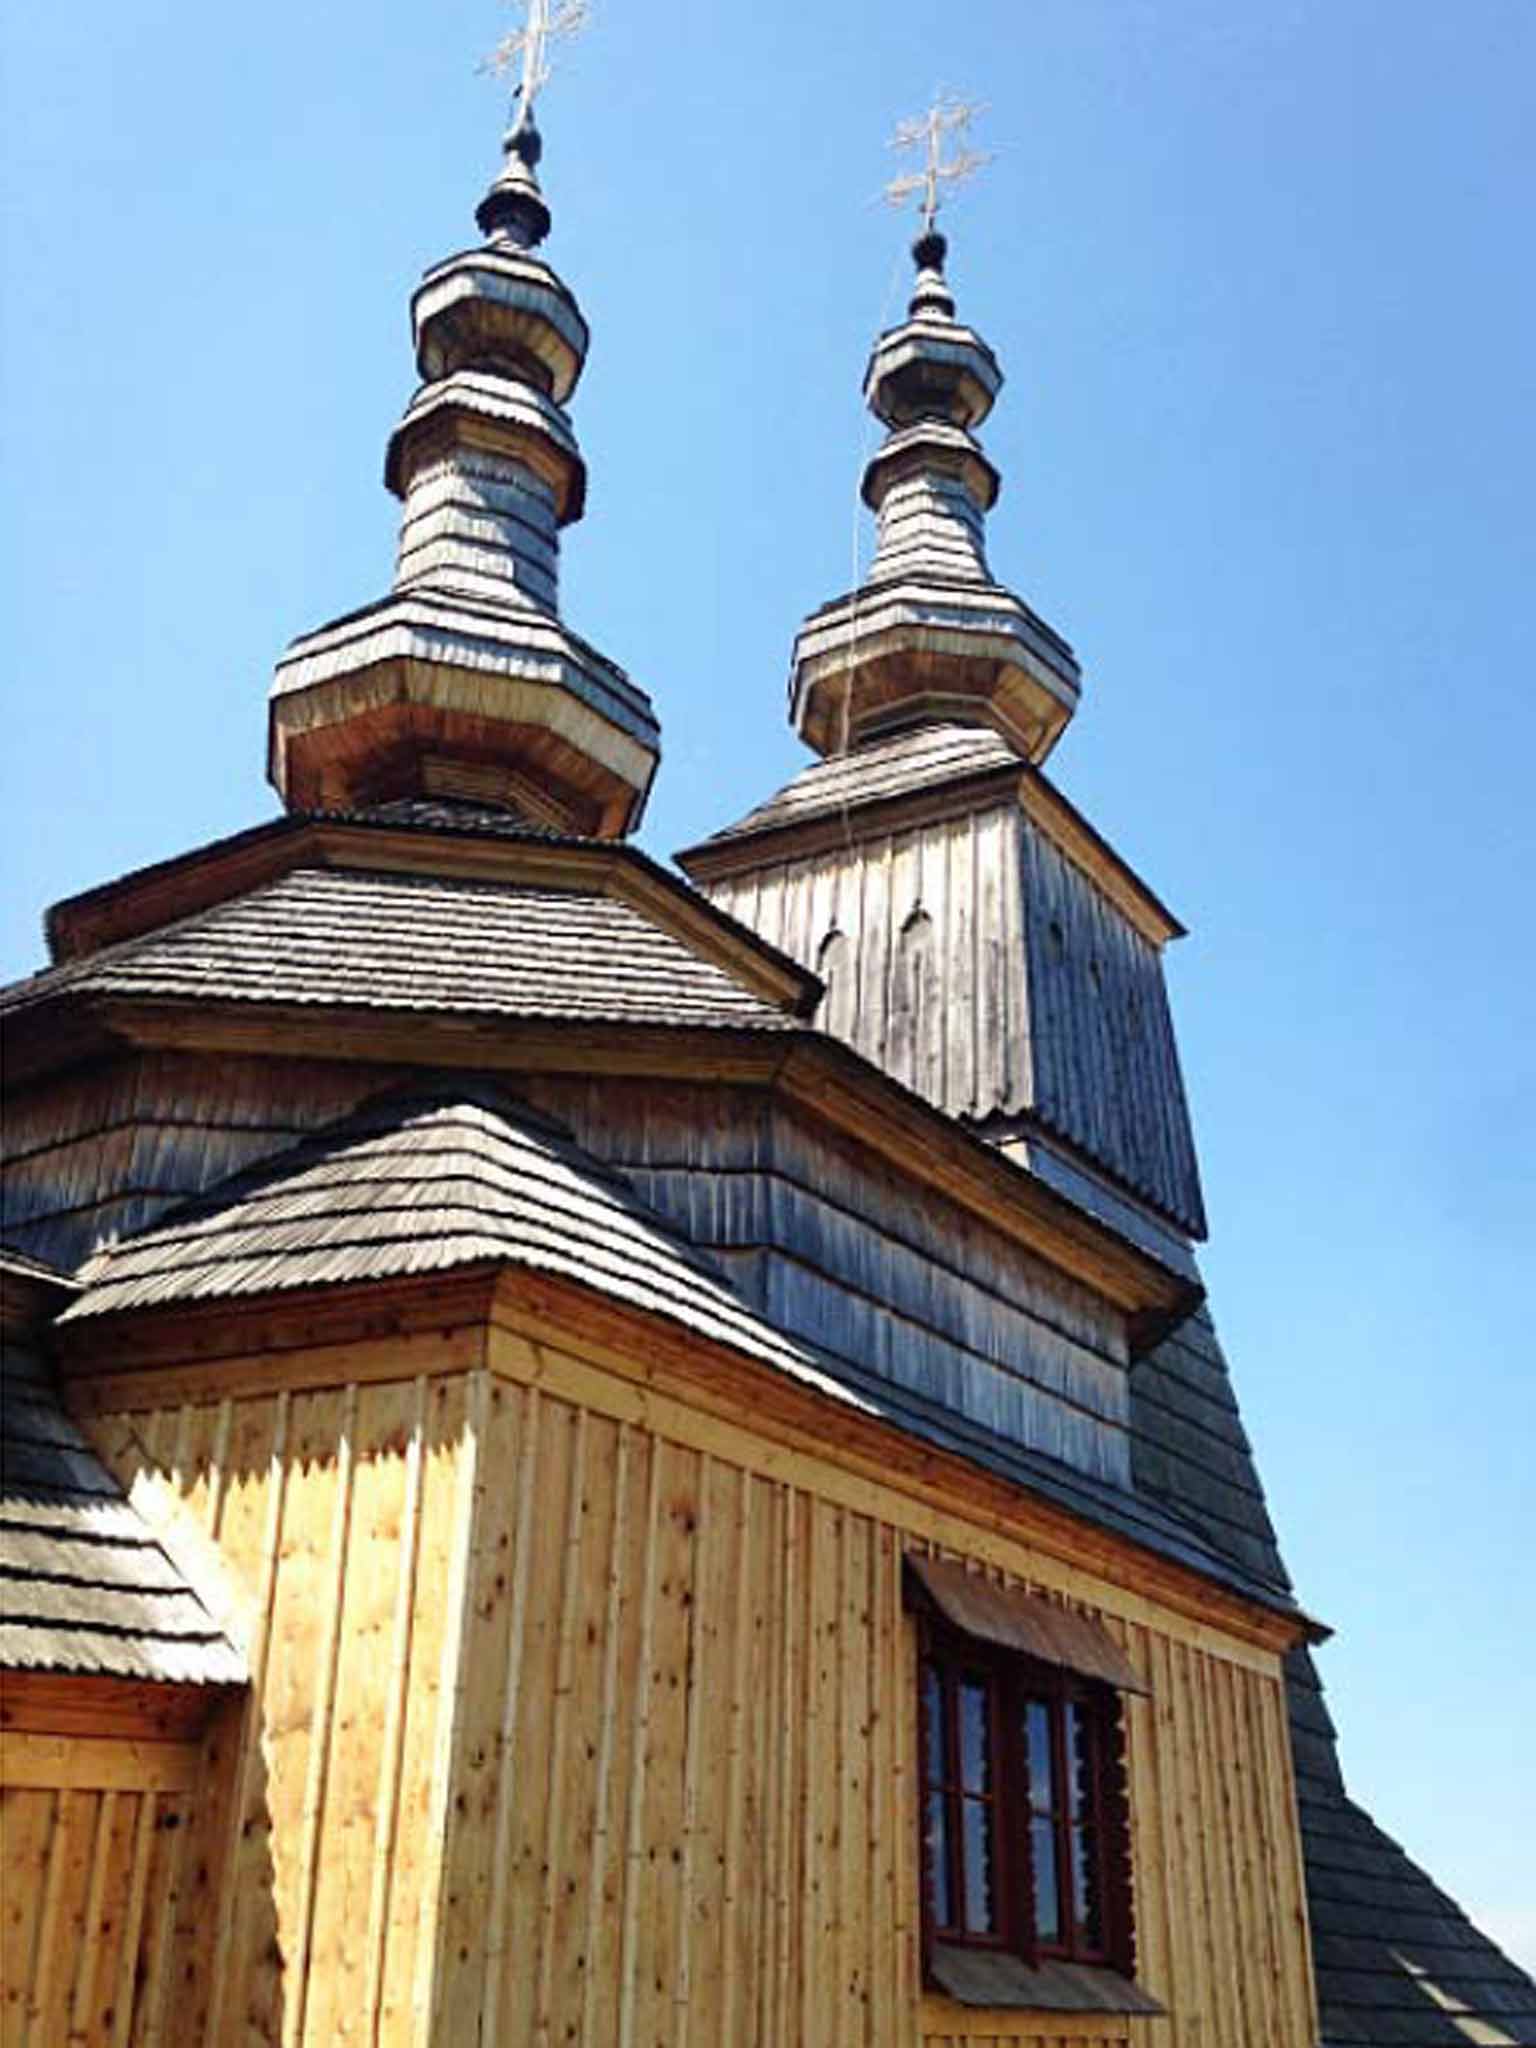 The Ruthenian wooden church in the village of Takos